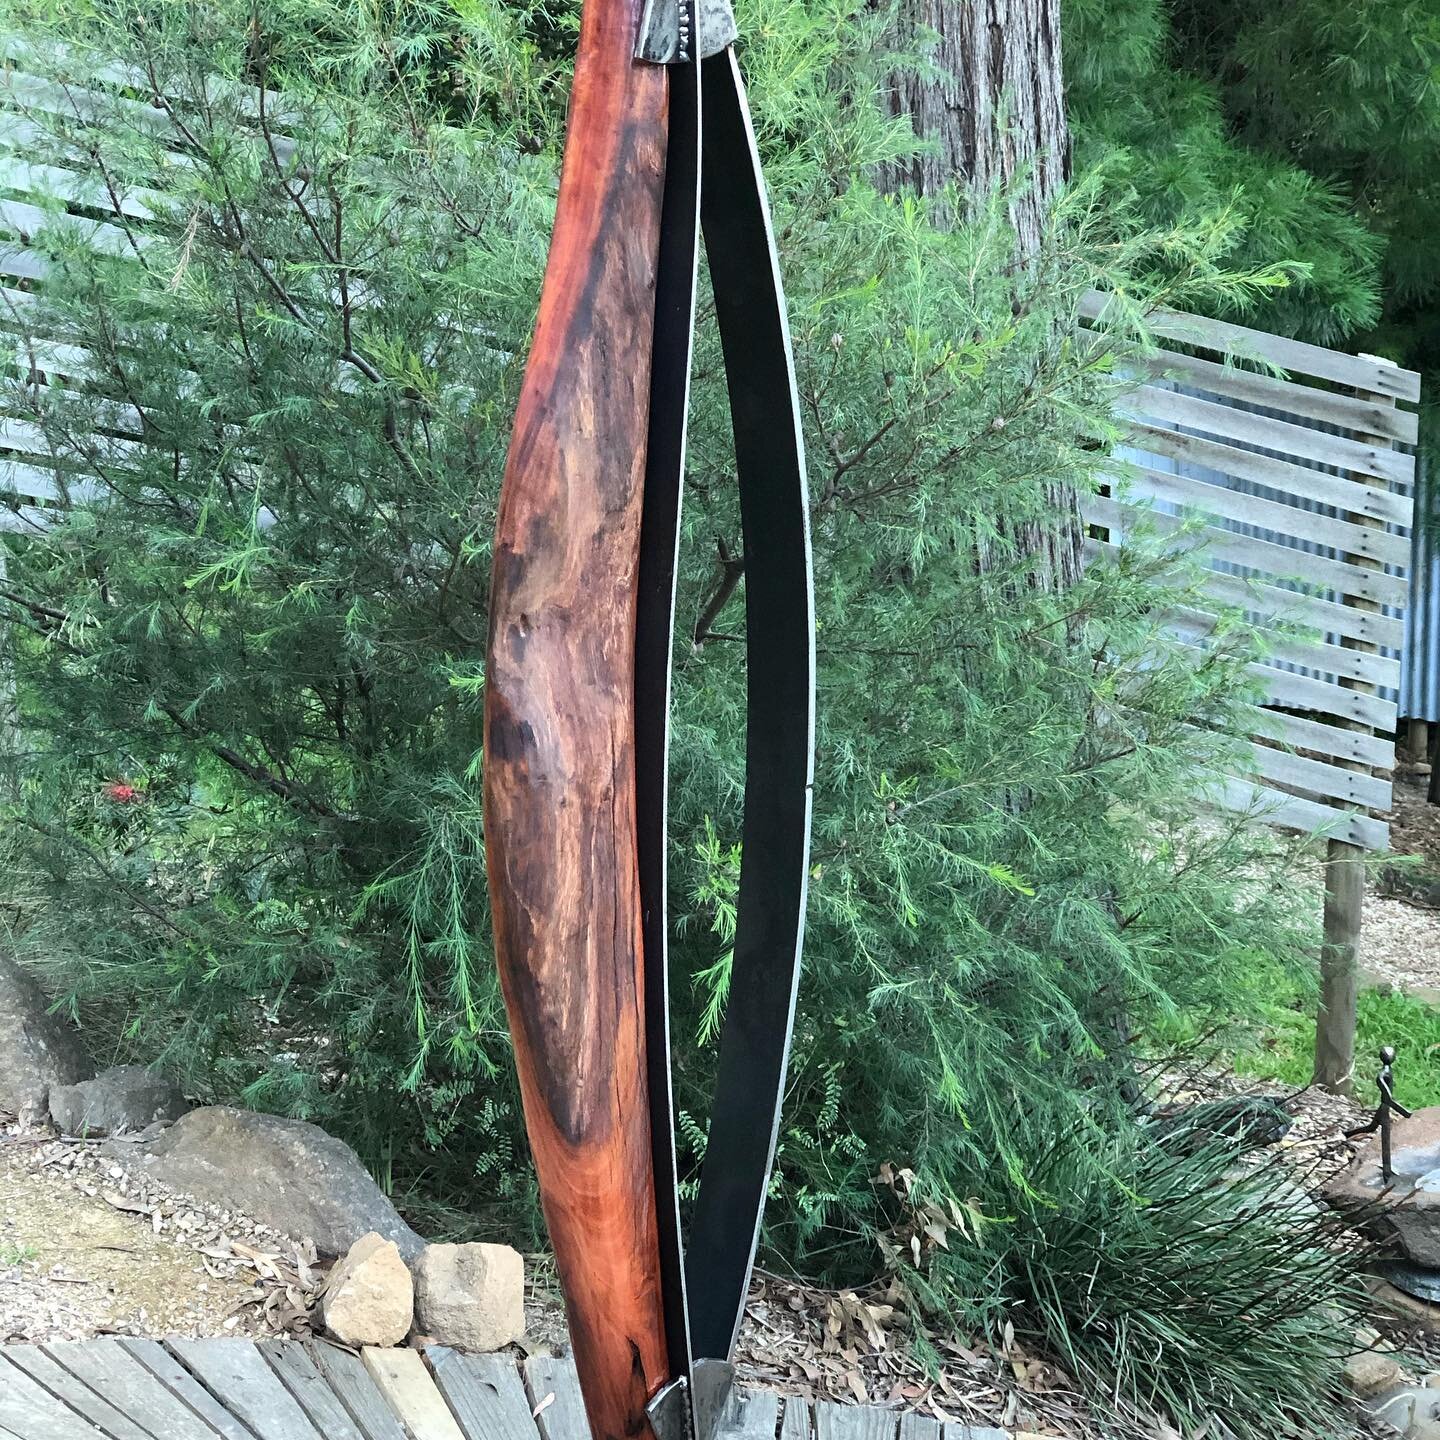 &ldquo;A Sunsets Glow&rdquo;
Loved peeling off the weathered surface of this redgum to find the treasure below. This piece is available at our online shop at: www.juetsculpture.com #openstudios #dros #sculpture